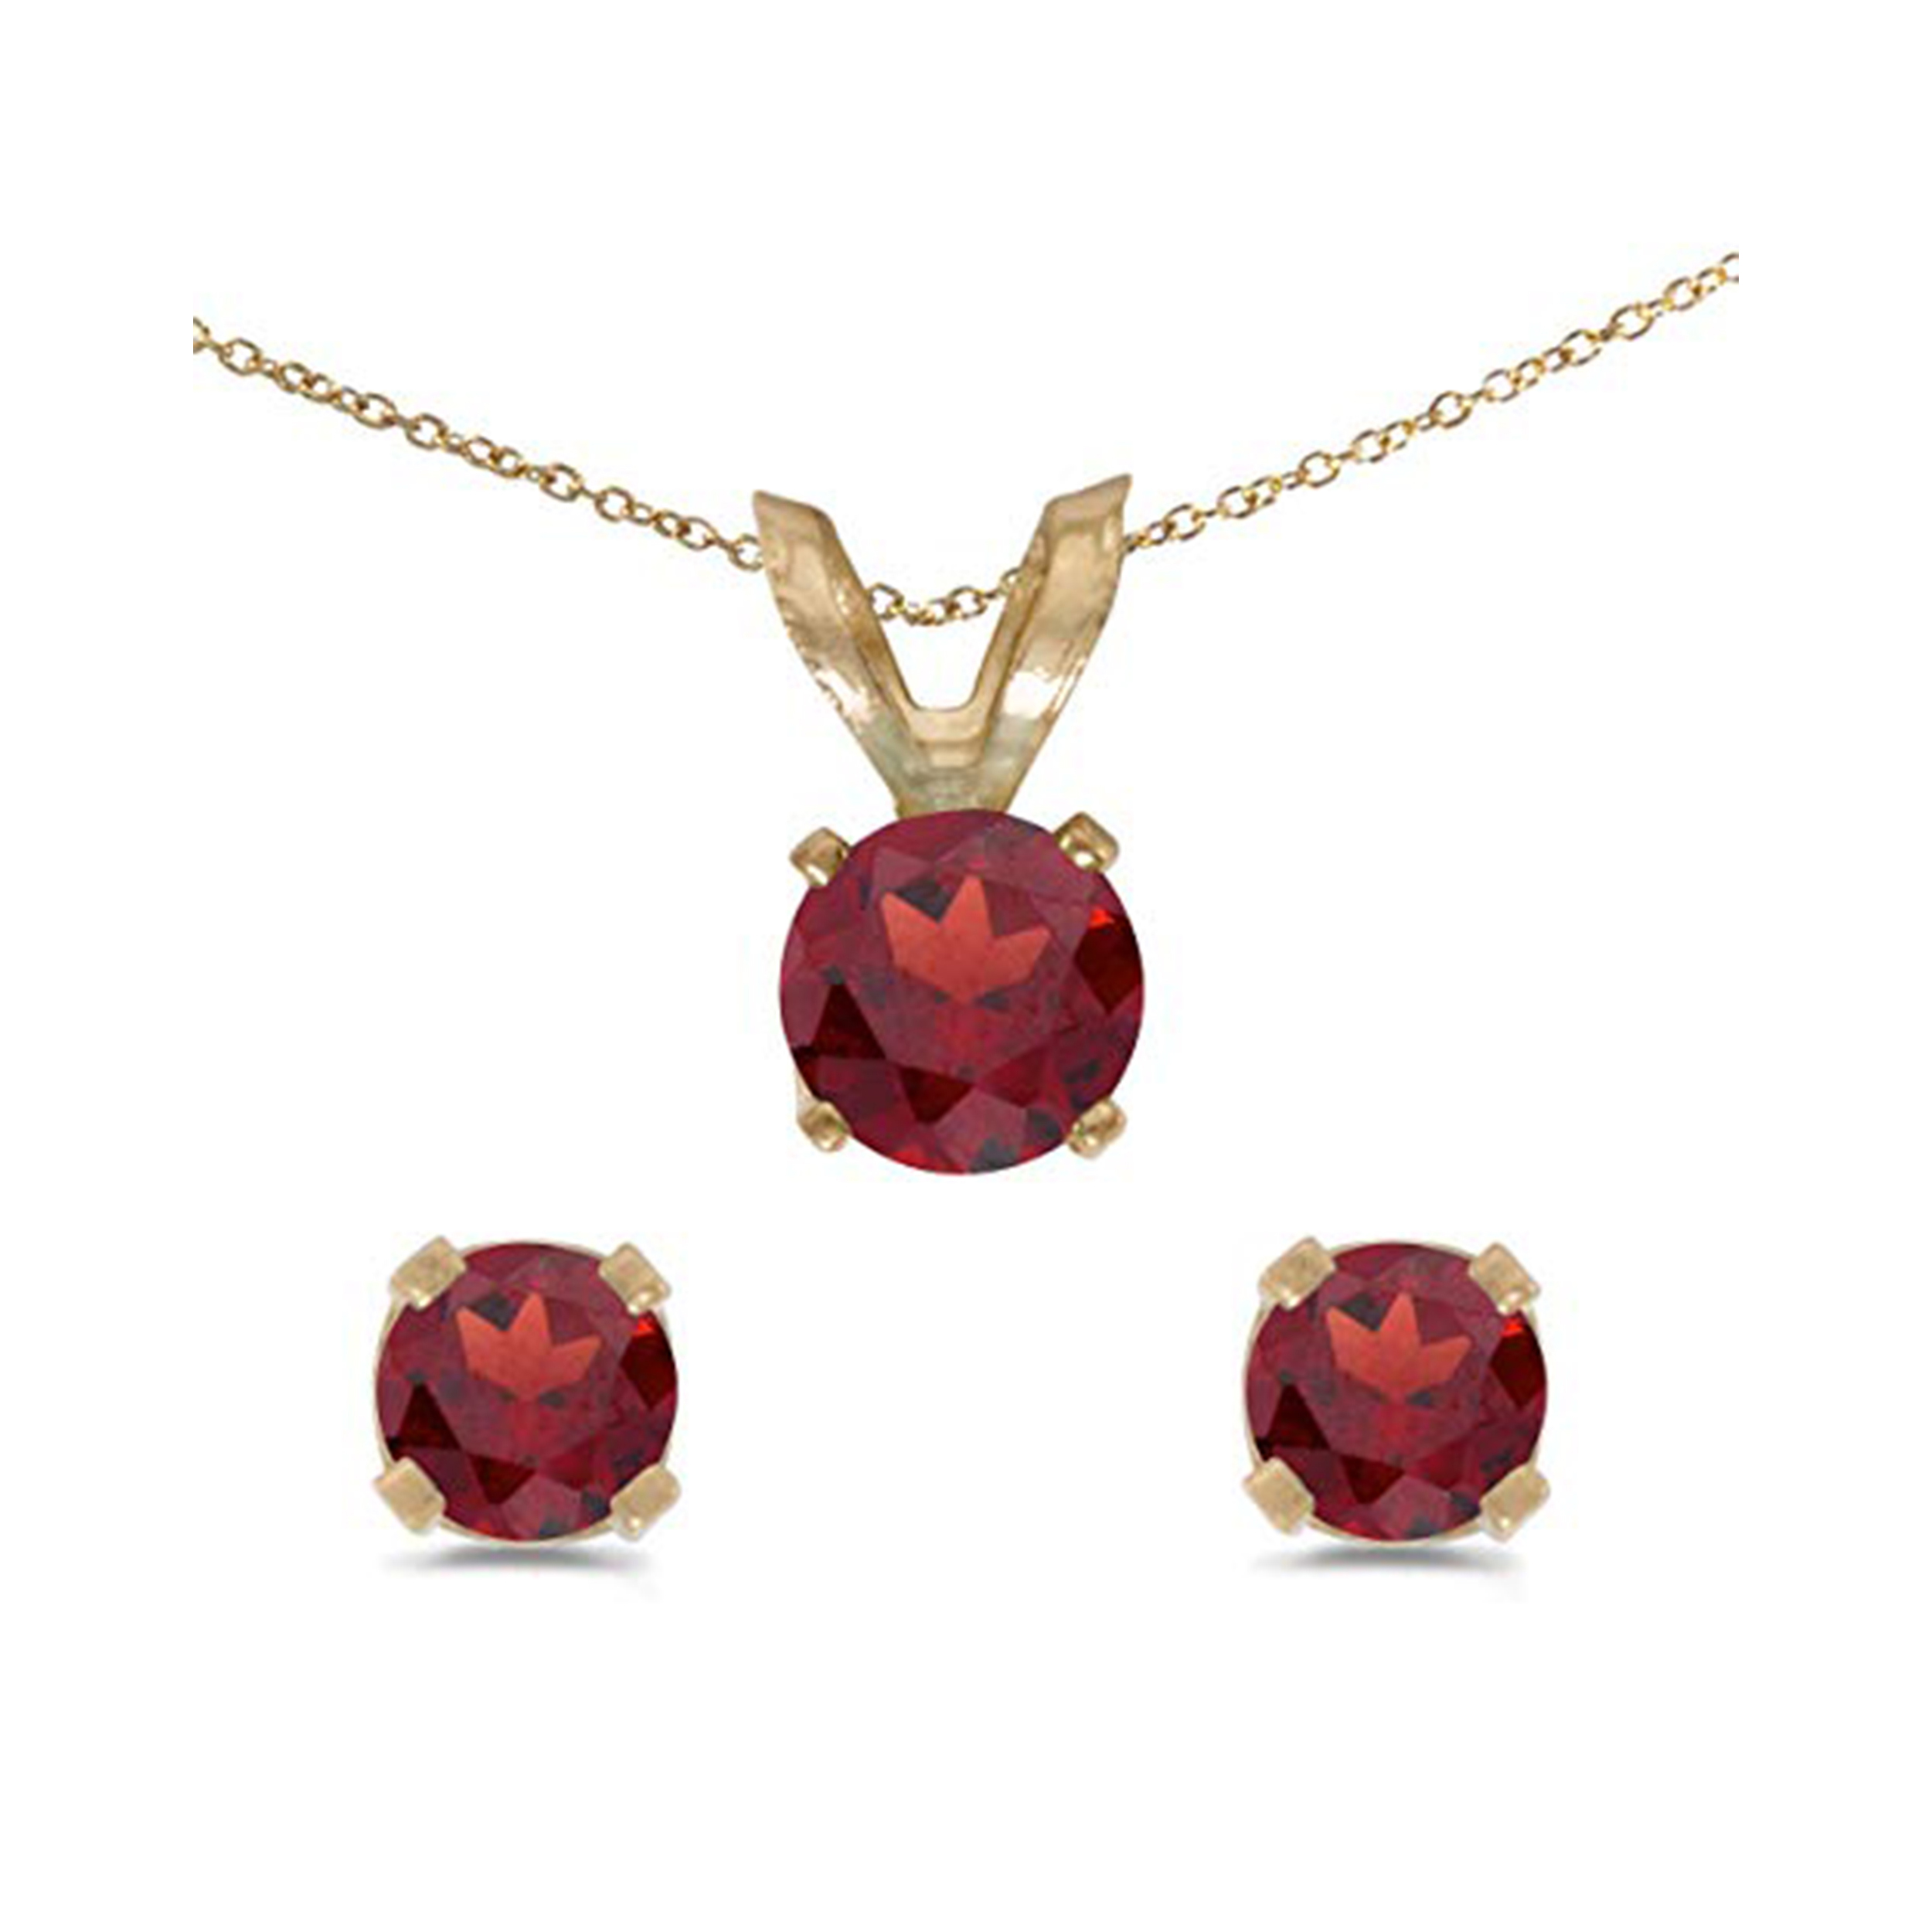 Bonjour Jewelers 4 Cttw Round Garnet 18 Inch Necklace In Earring Set 24k Gold Plated